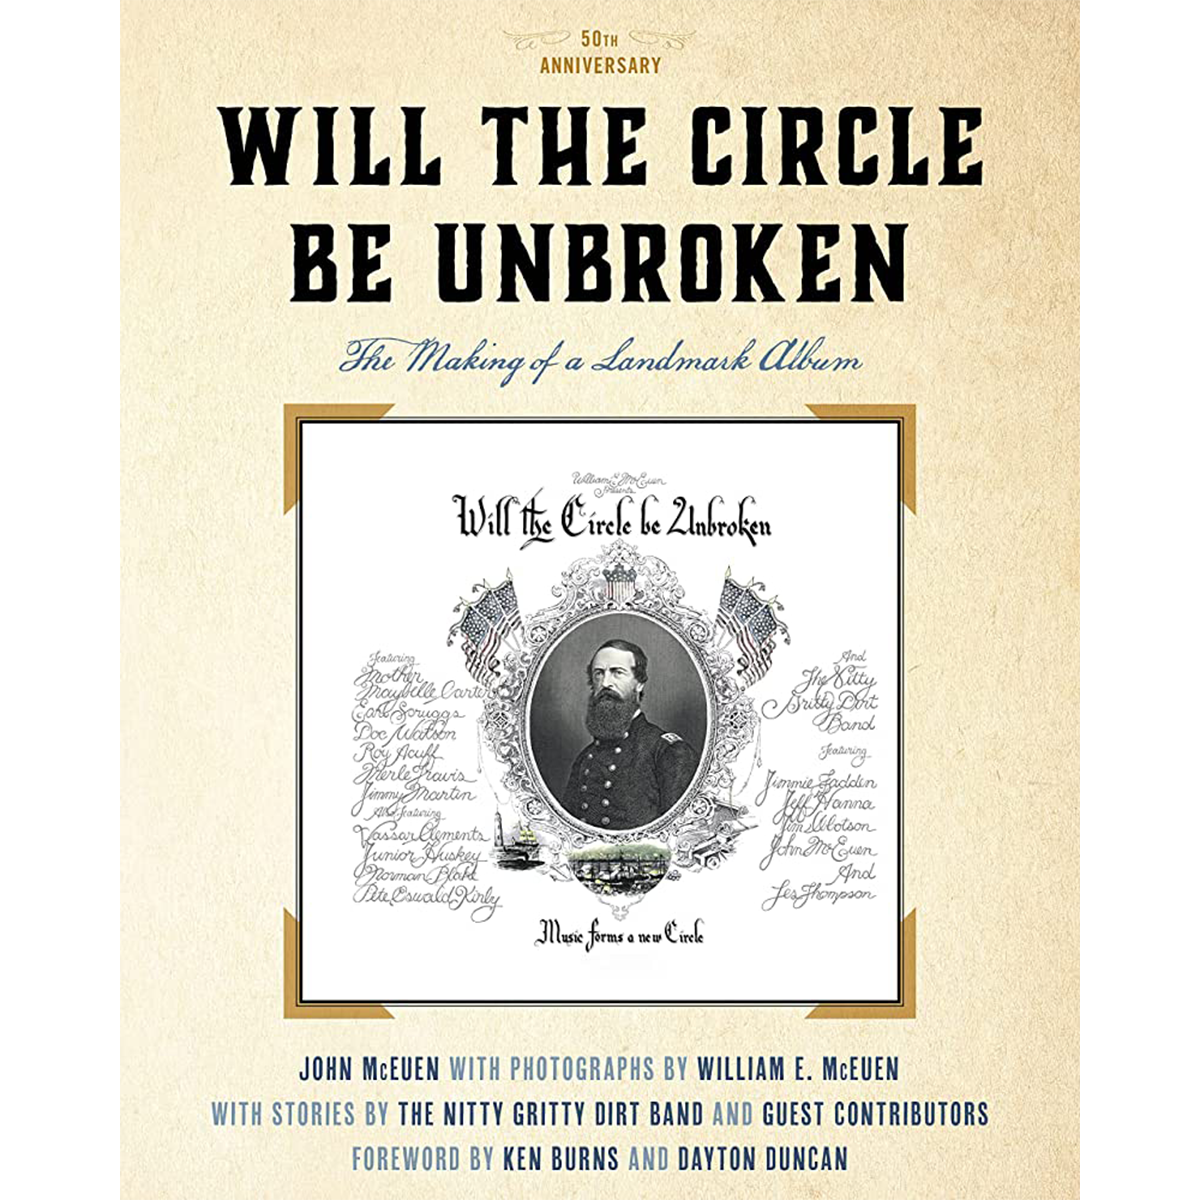 Will The Circle Be Unbroken: The Making of a Landmark Album, 50th